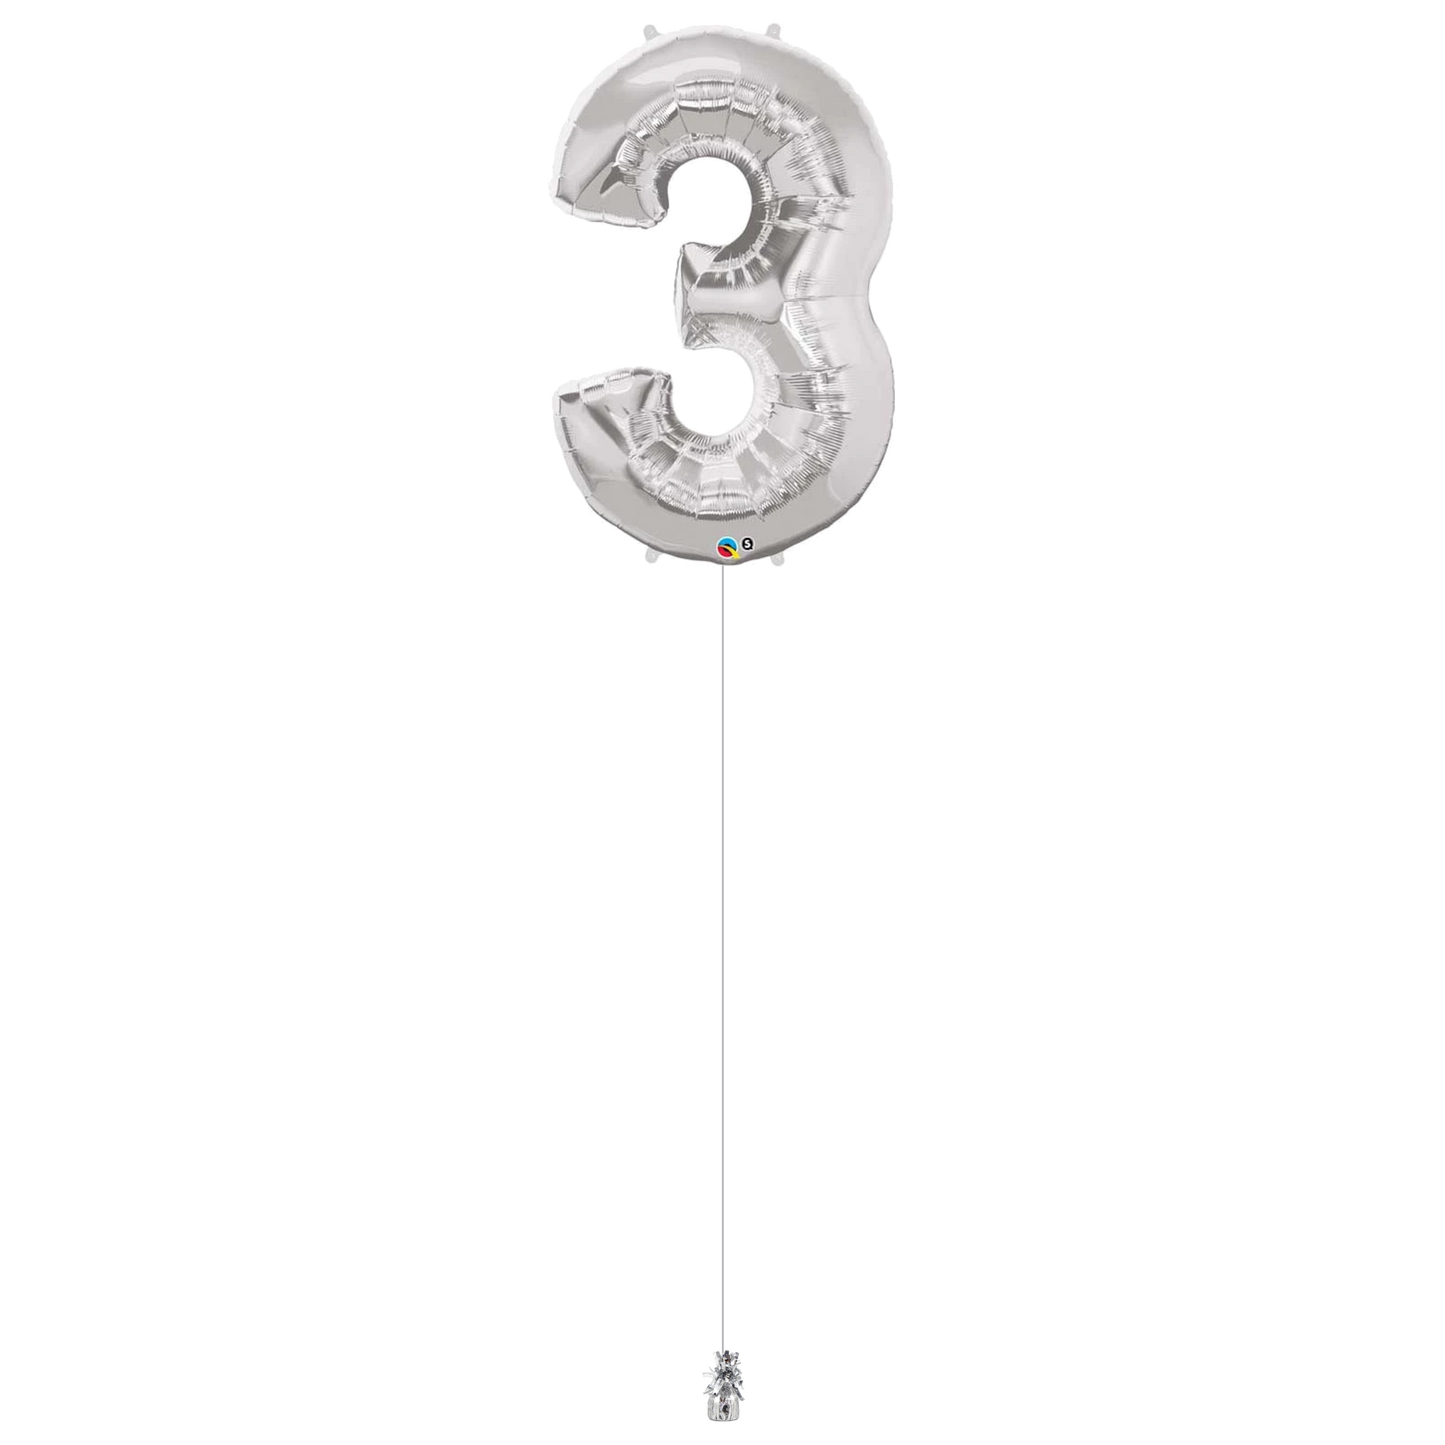 34″ (86cm) Number Foil Helium Balloon on weight